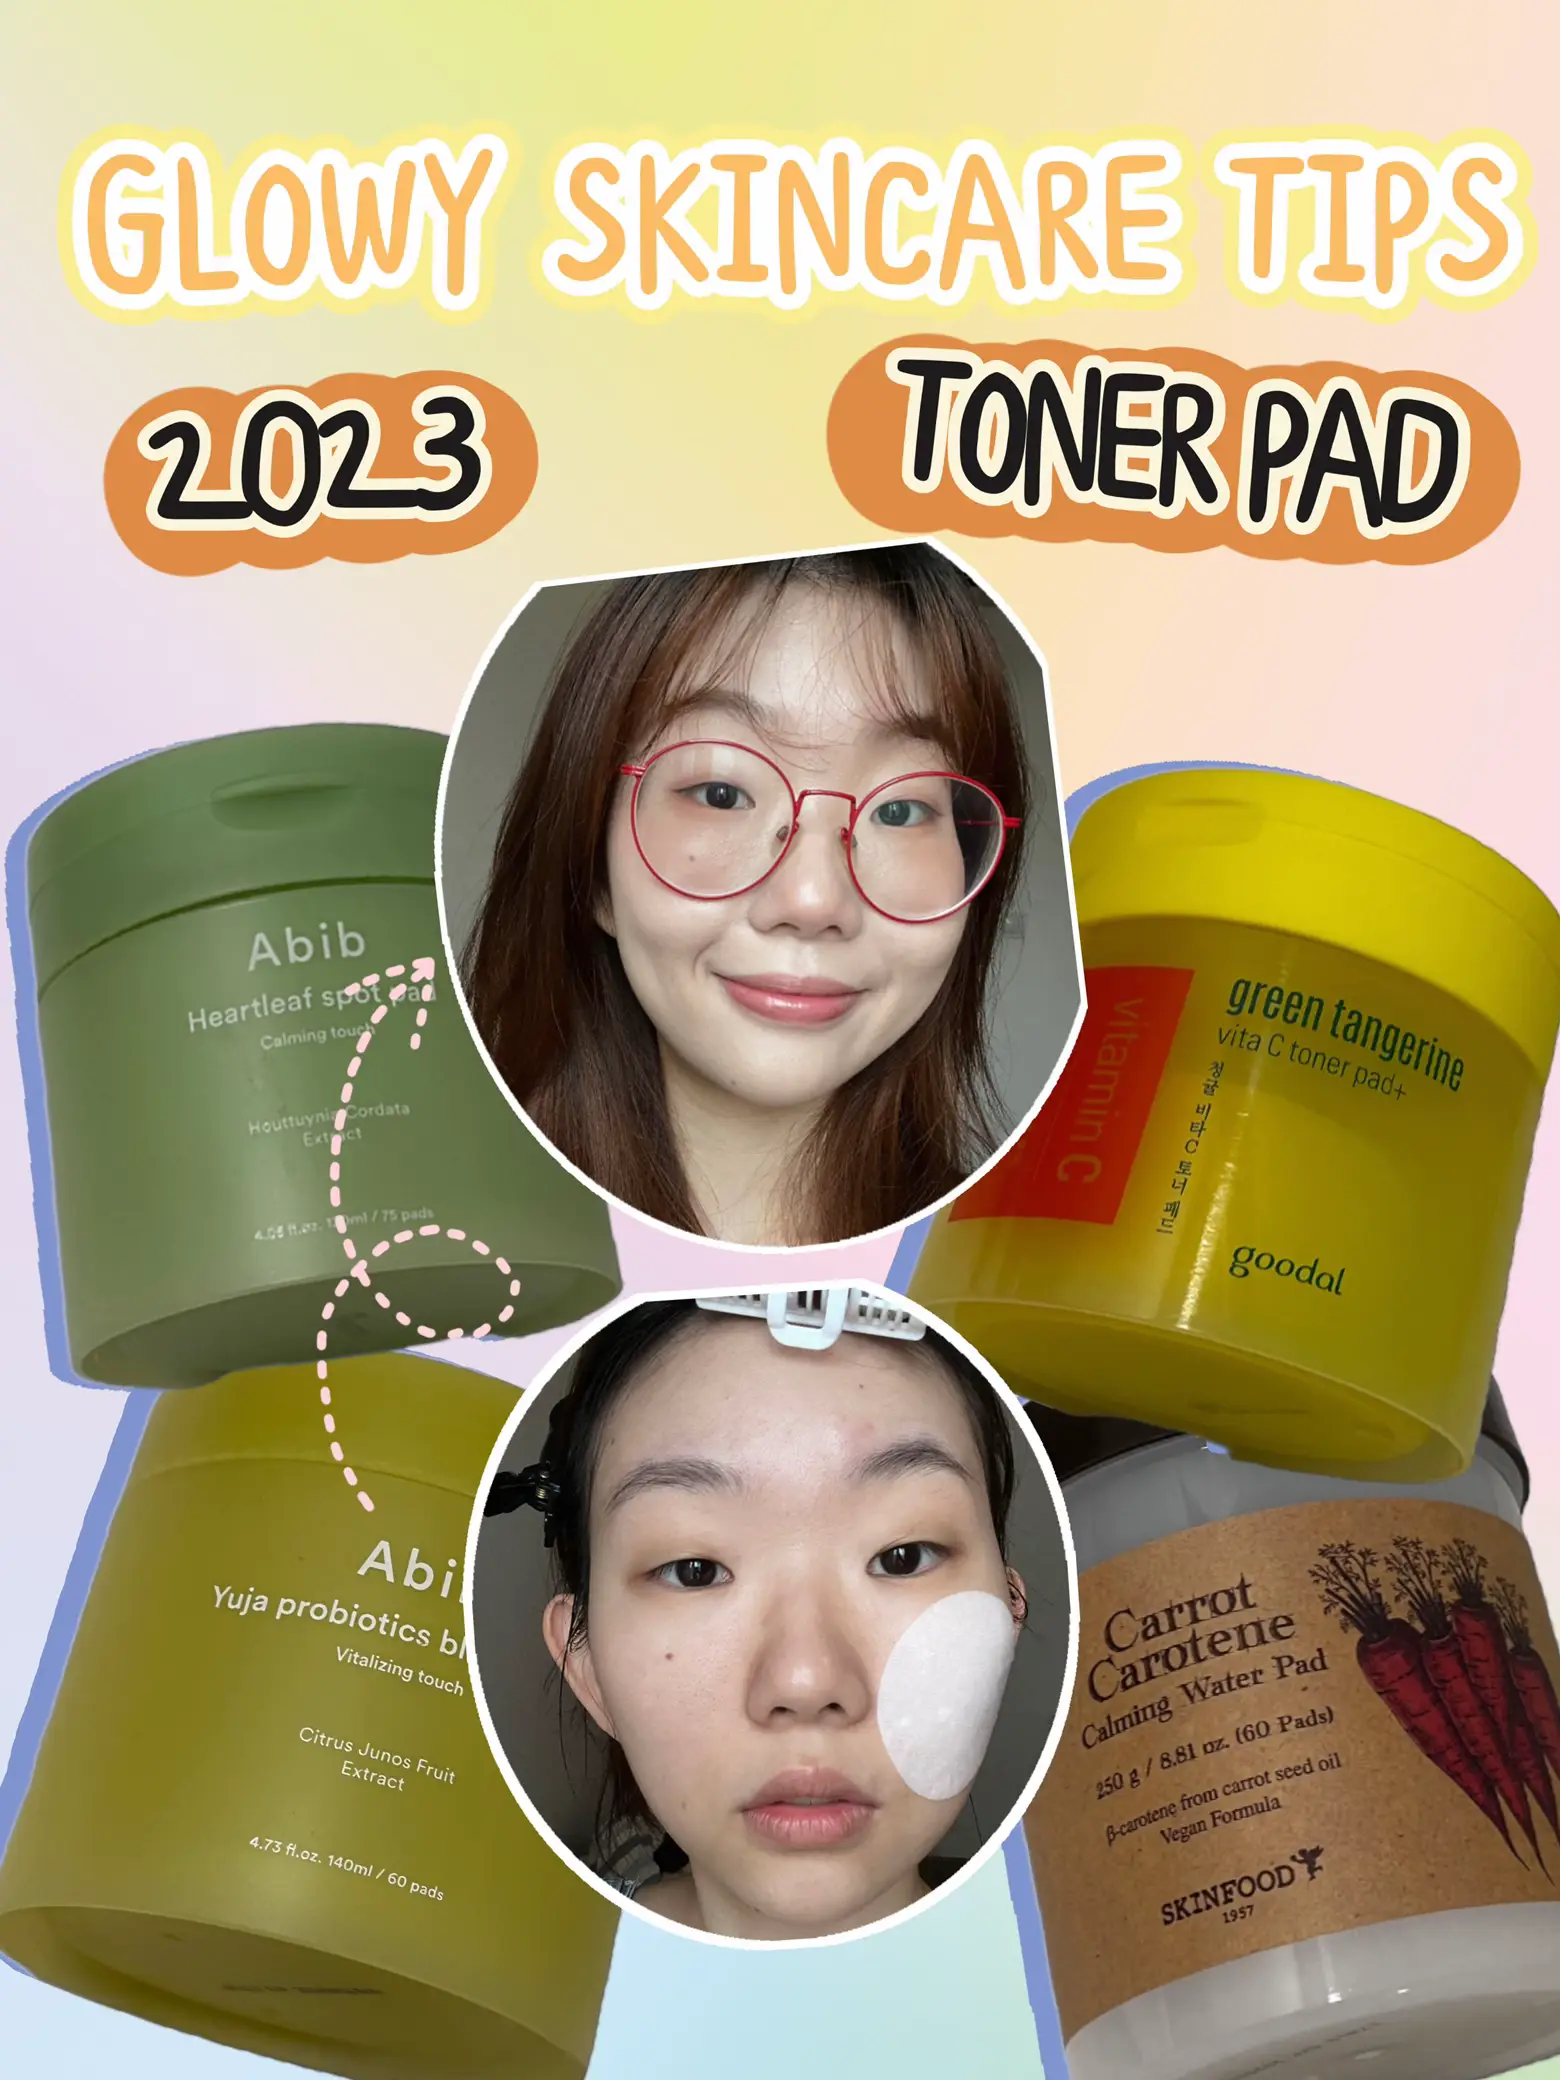 Have been seeing many beauty influencer talking about toner pads